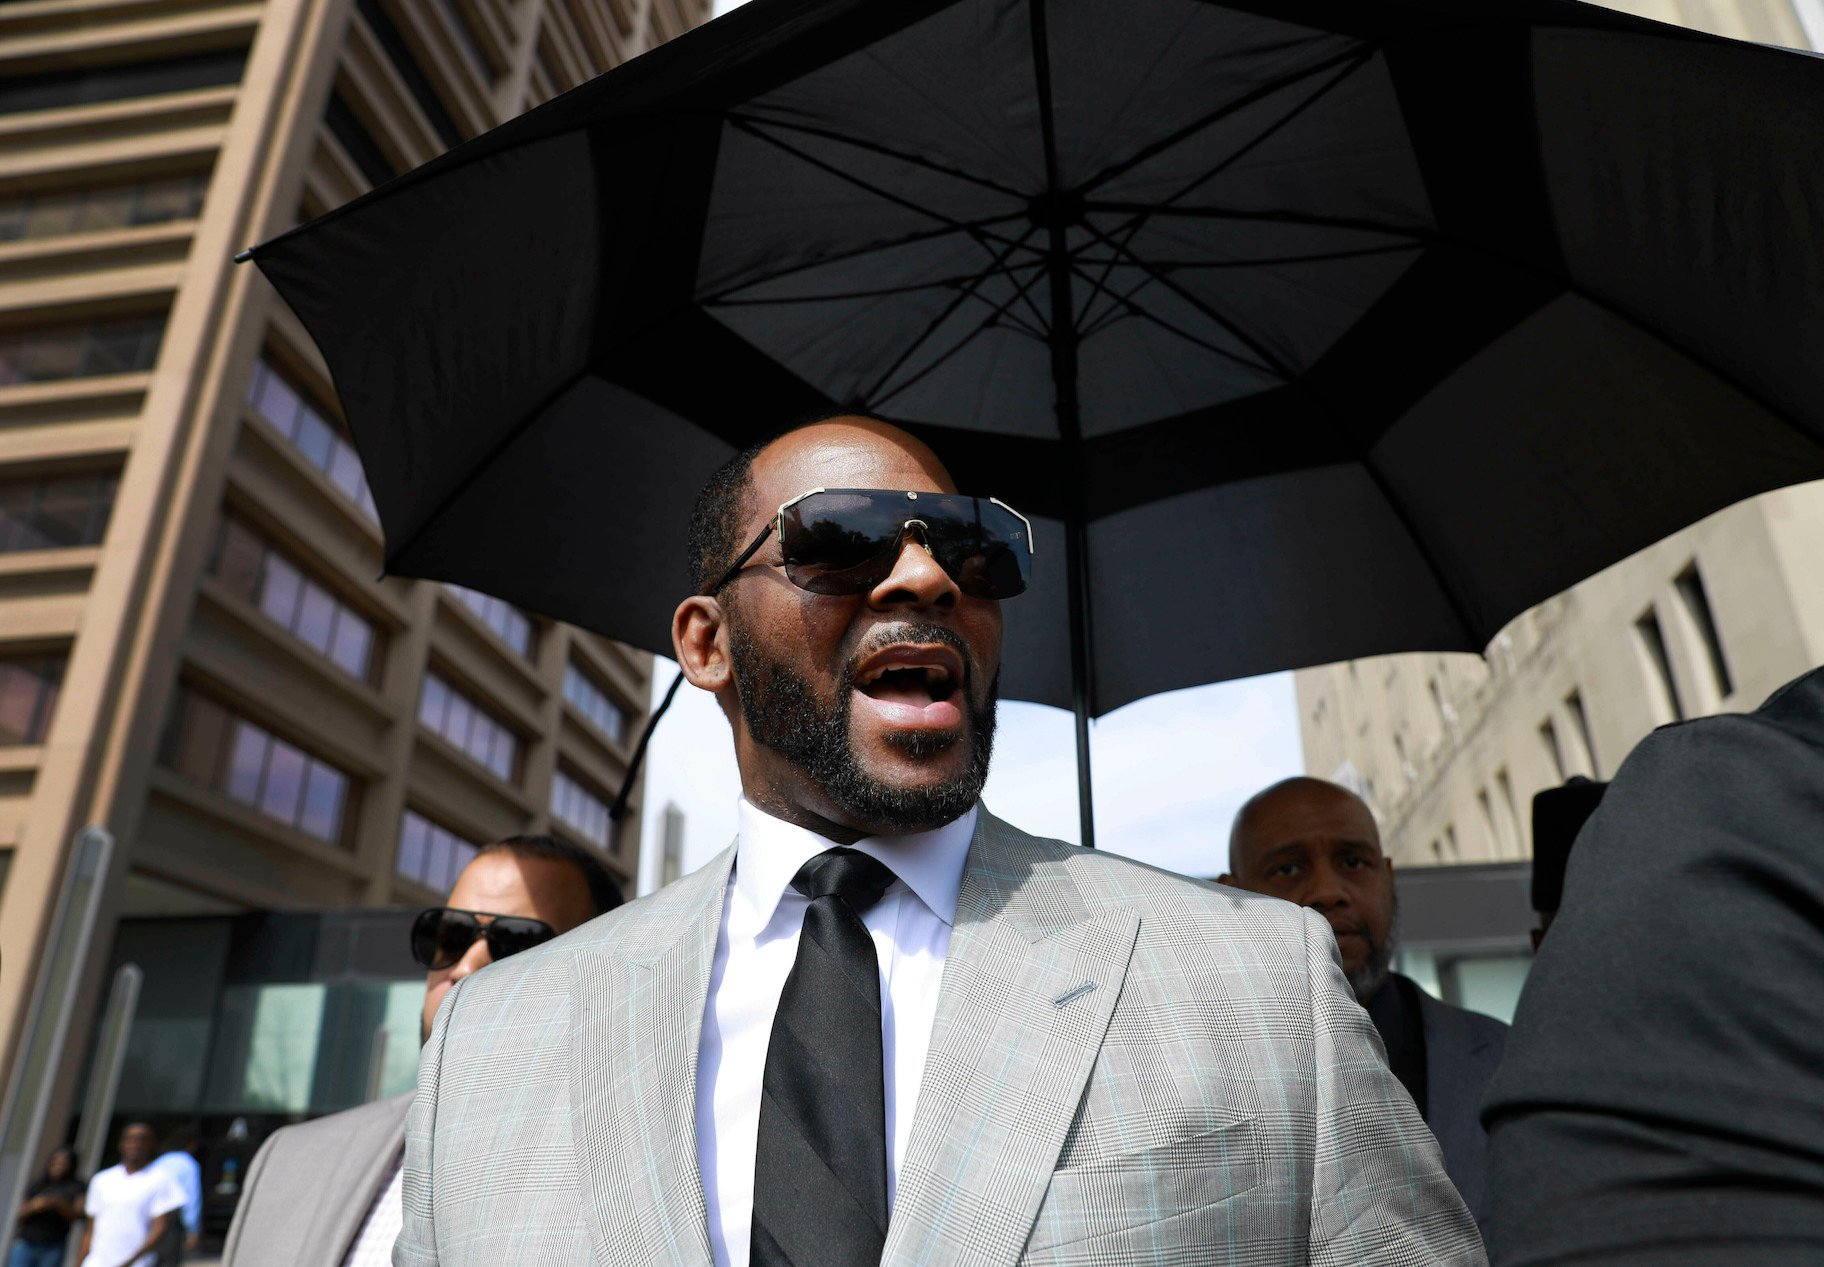 In this June 6, 2019 file photo, musician R. Kelly departs the Leighton Criminal Court building after pleading not guilty to 11 additional sex-related charges in Chicago. A U.S. Attorney’s office spokesman says Kelly was arrested Thursday night, July 11 on federal sex-crime charges in Chicago. (AP Photo/Amr Alfiky, File)